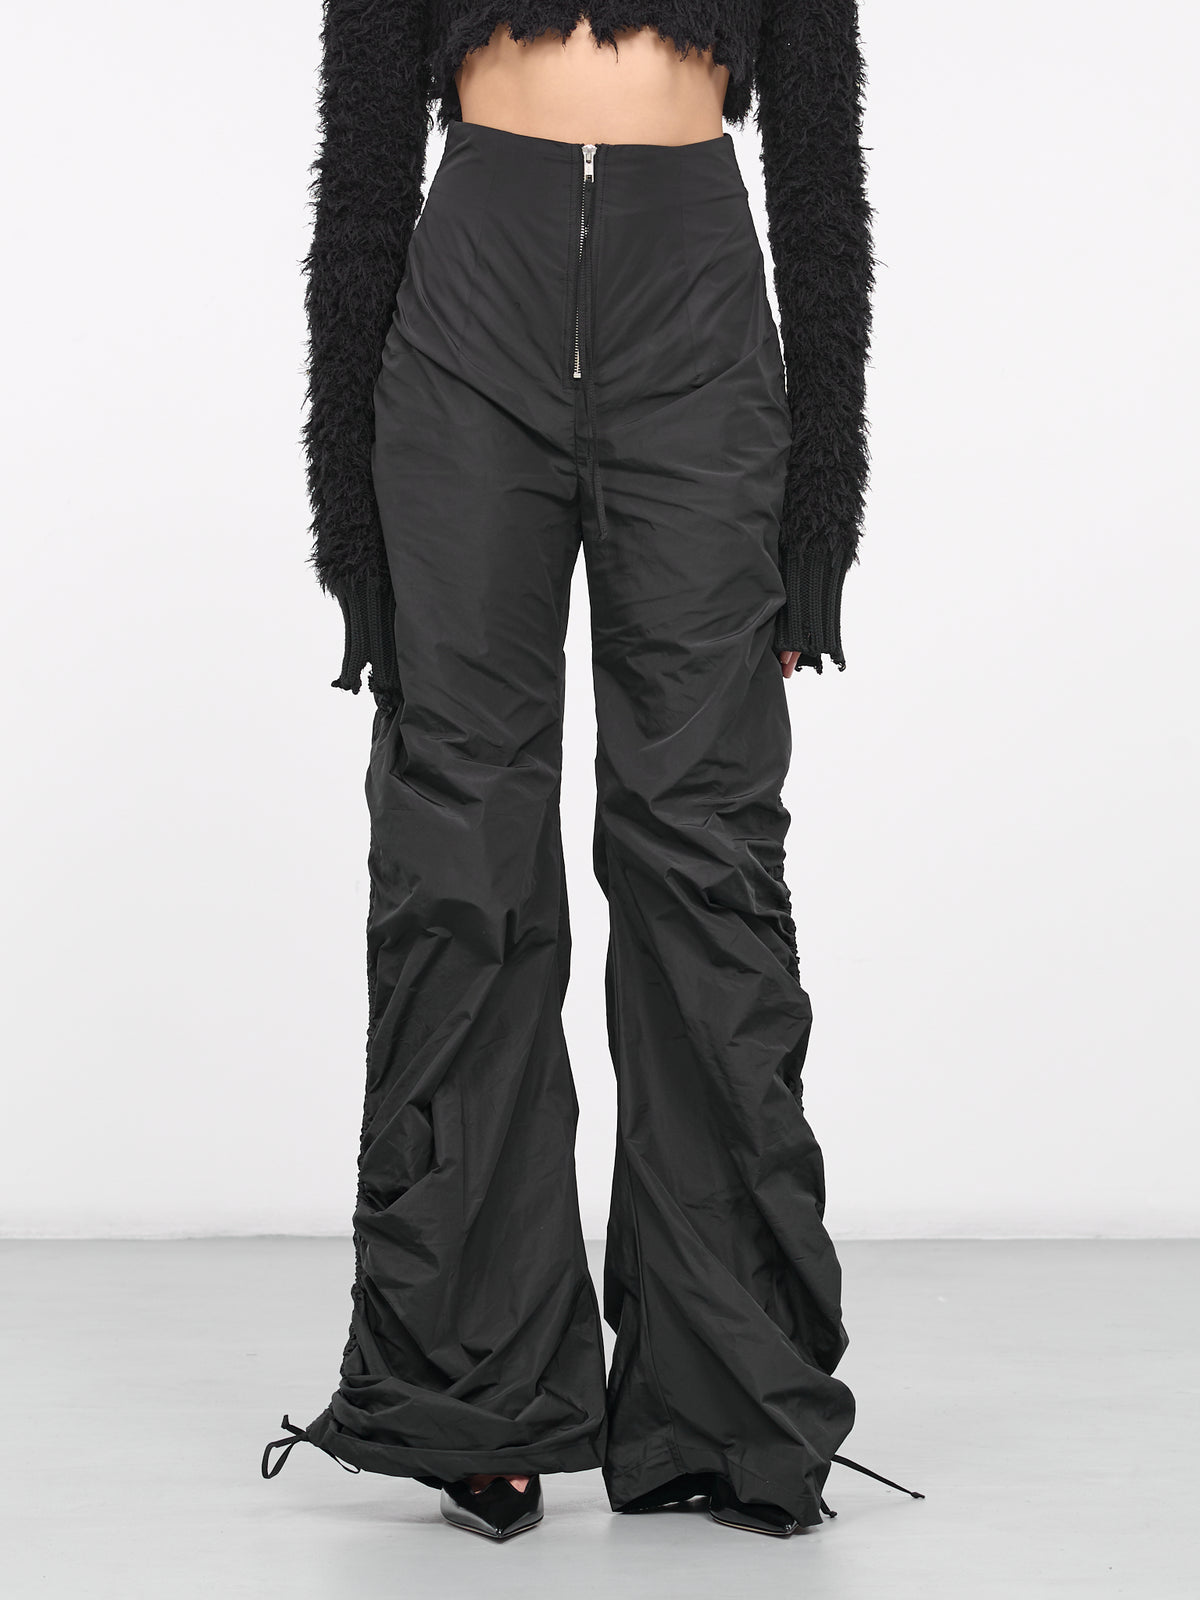 Gathered Trousers (TRO02BL-BLACK)